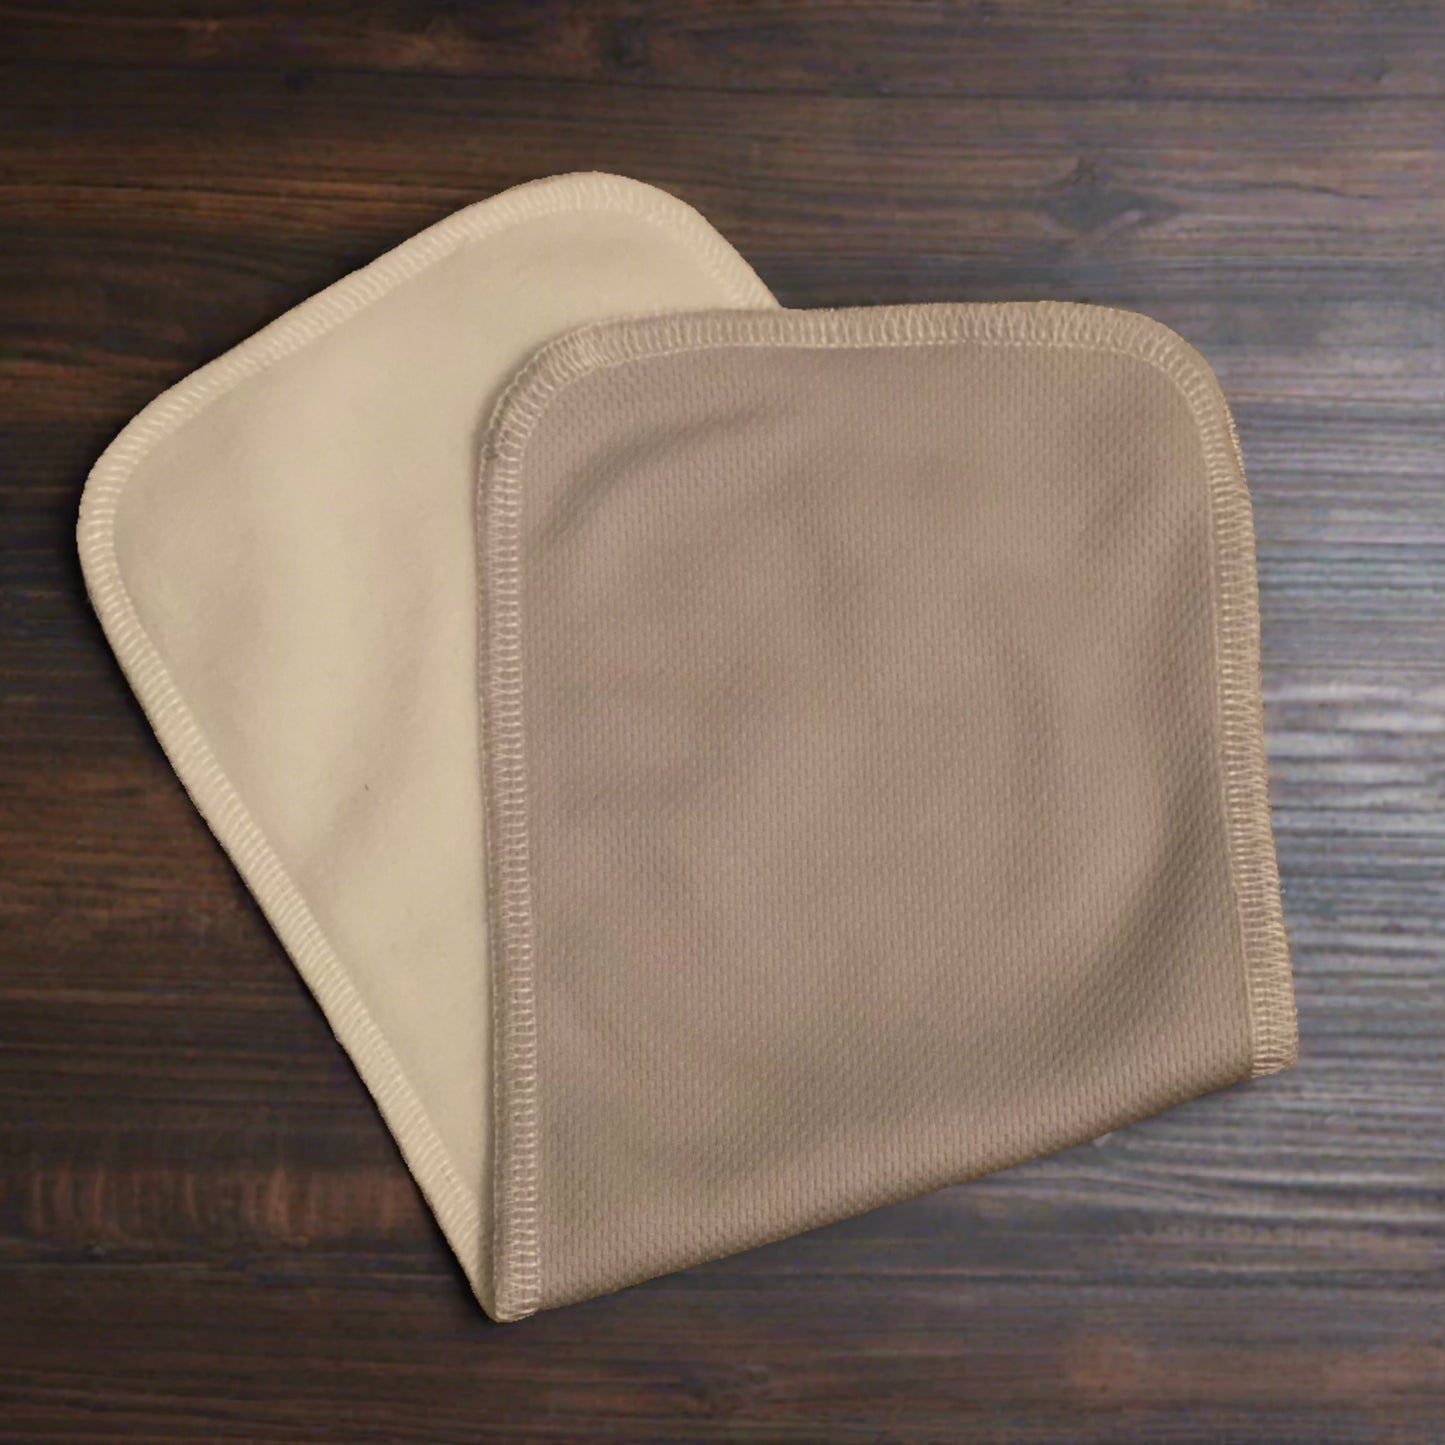 Washable Diaper Liners - AWJ/Fleece (Solid)